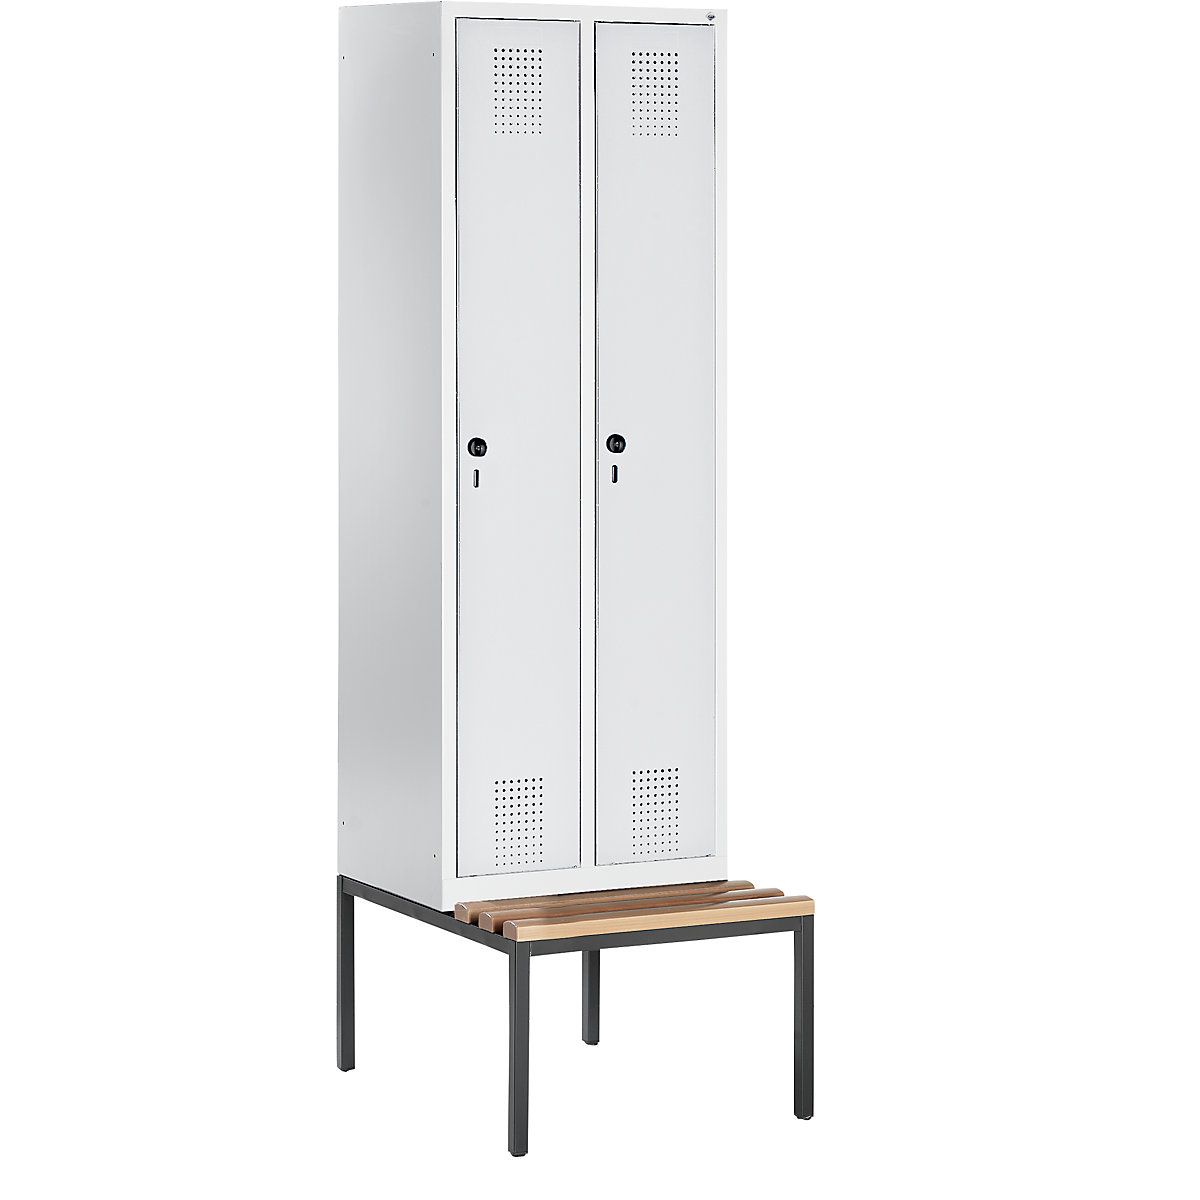 EVOLO cloakroom locker – C+P, with bench mounted underneath, 2 compartments, compartment width 300 mm, light grey-6